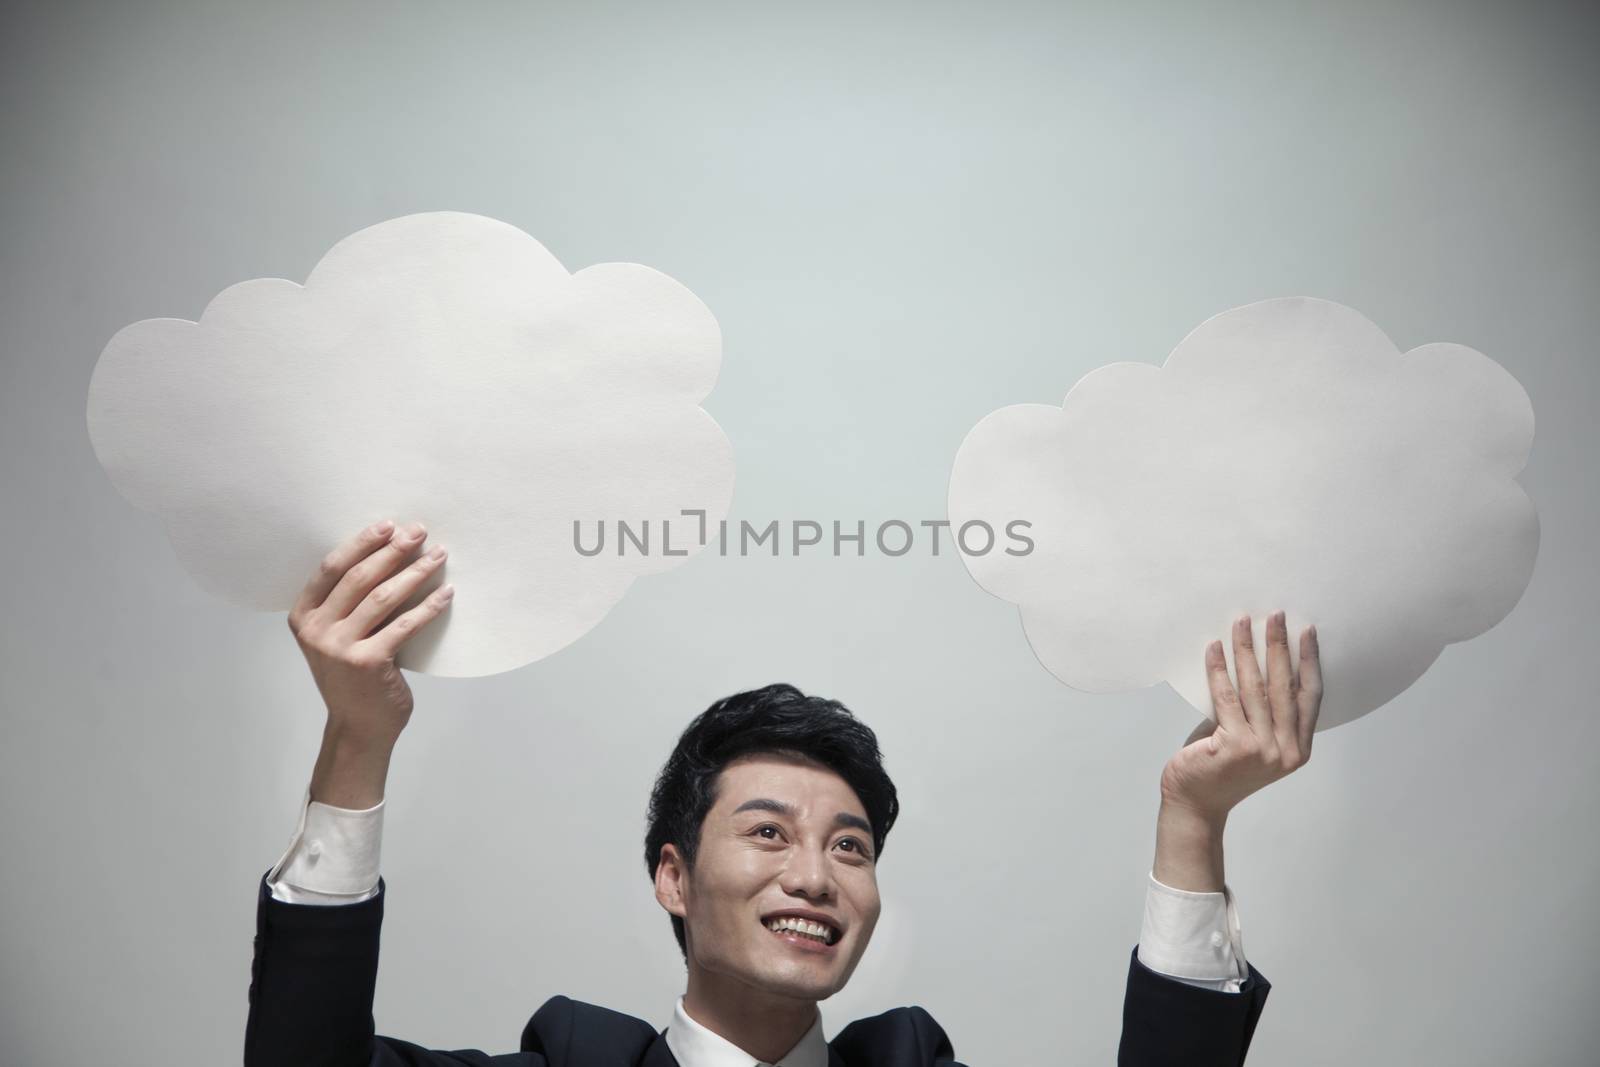 Smiling businessman holding two paper clouds, studio shot